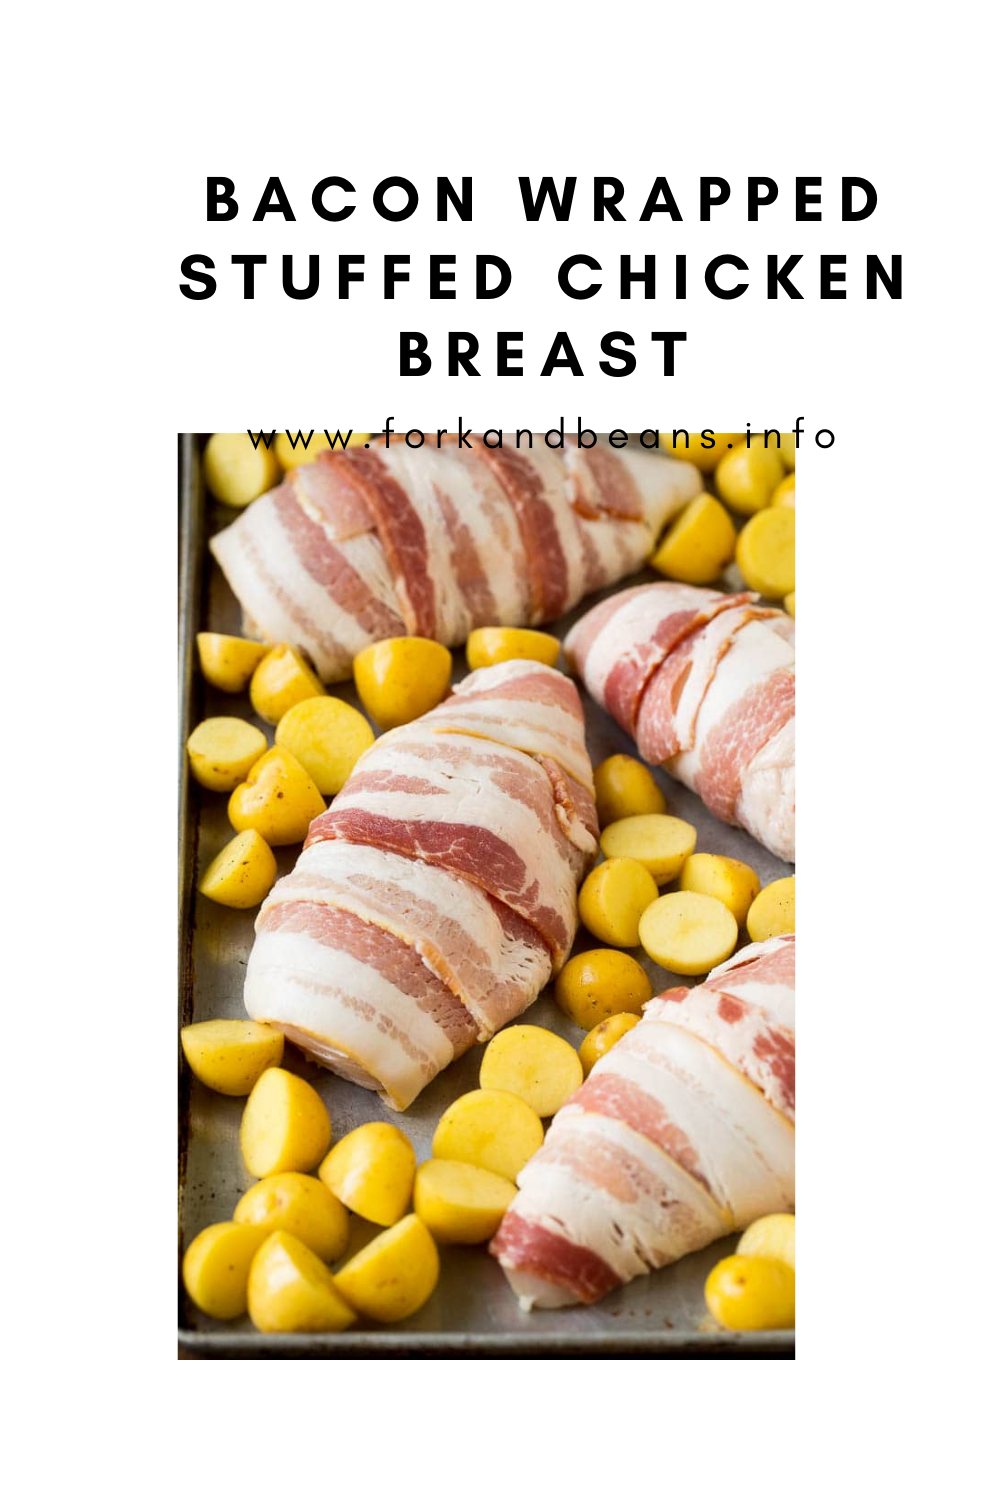 BACON WRAPPED STUFFED CHICKEN BREAST